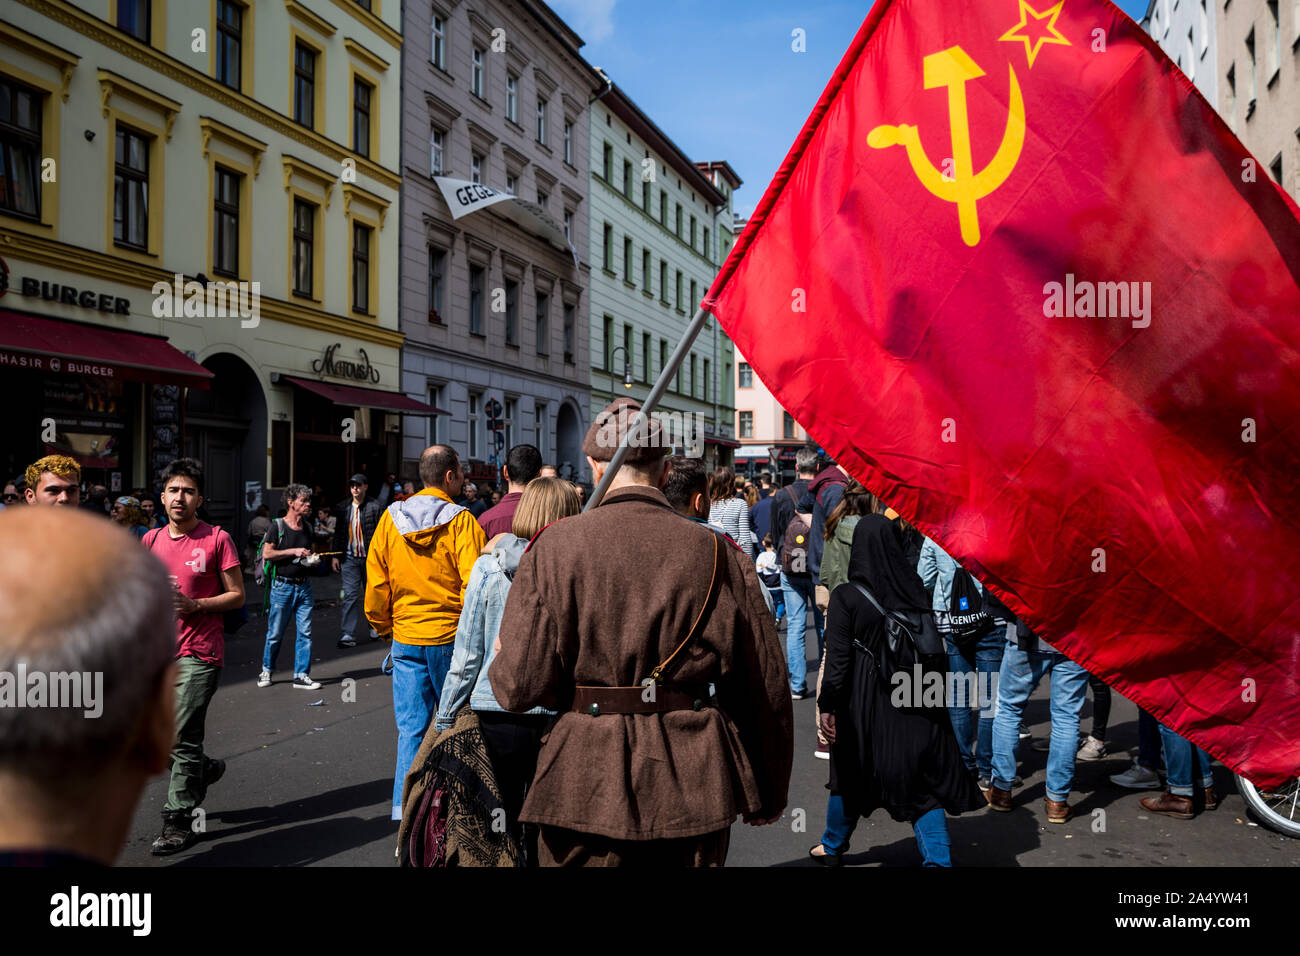 An elderly man in military uniform carries a communist flag on May Day 2019 in Berlin, Germany Stock Photo